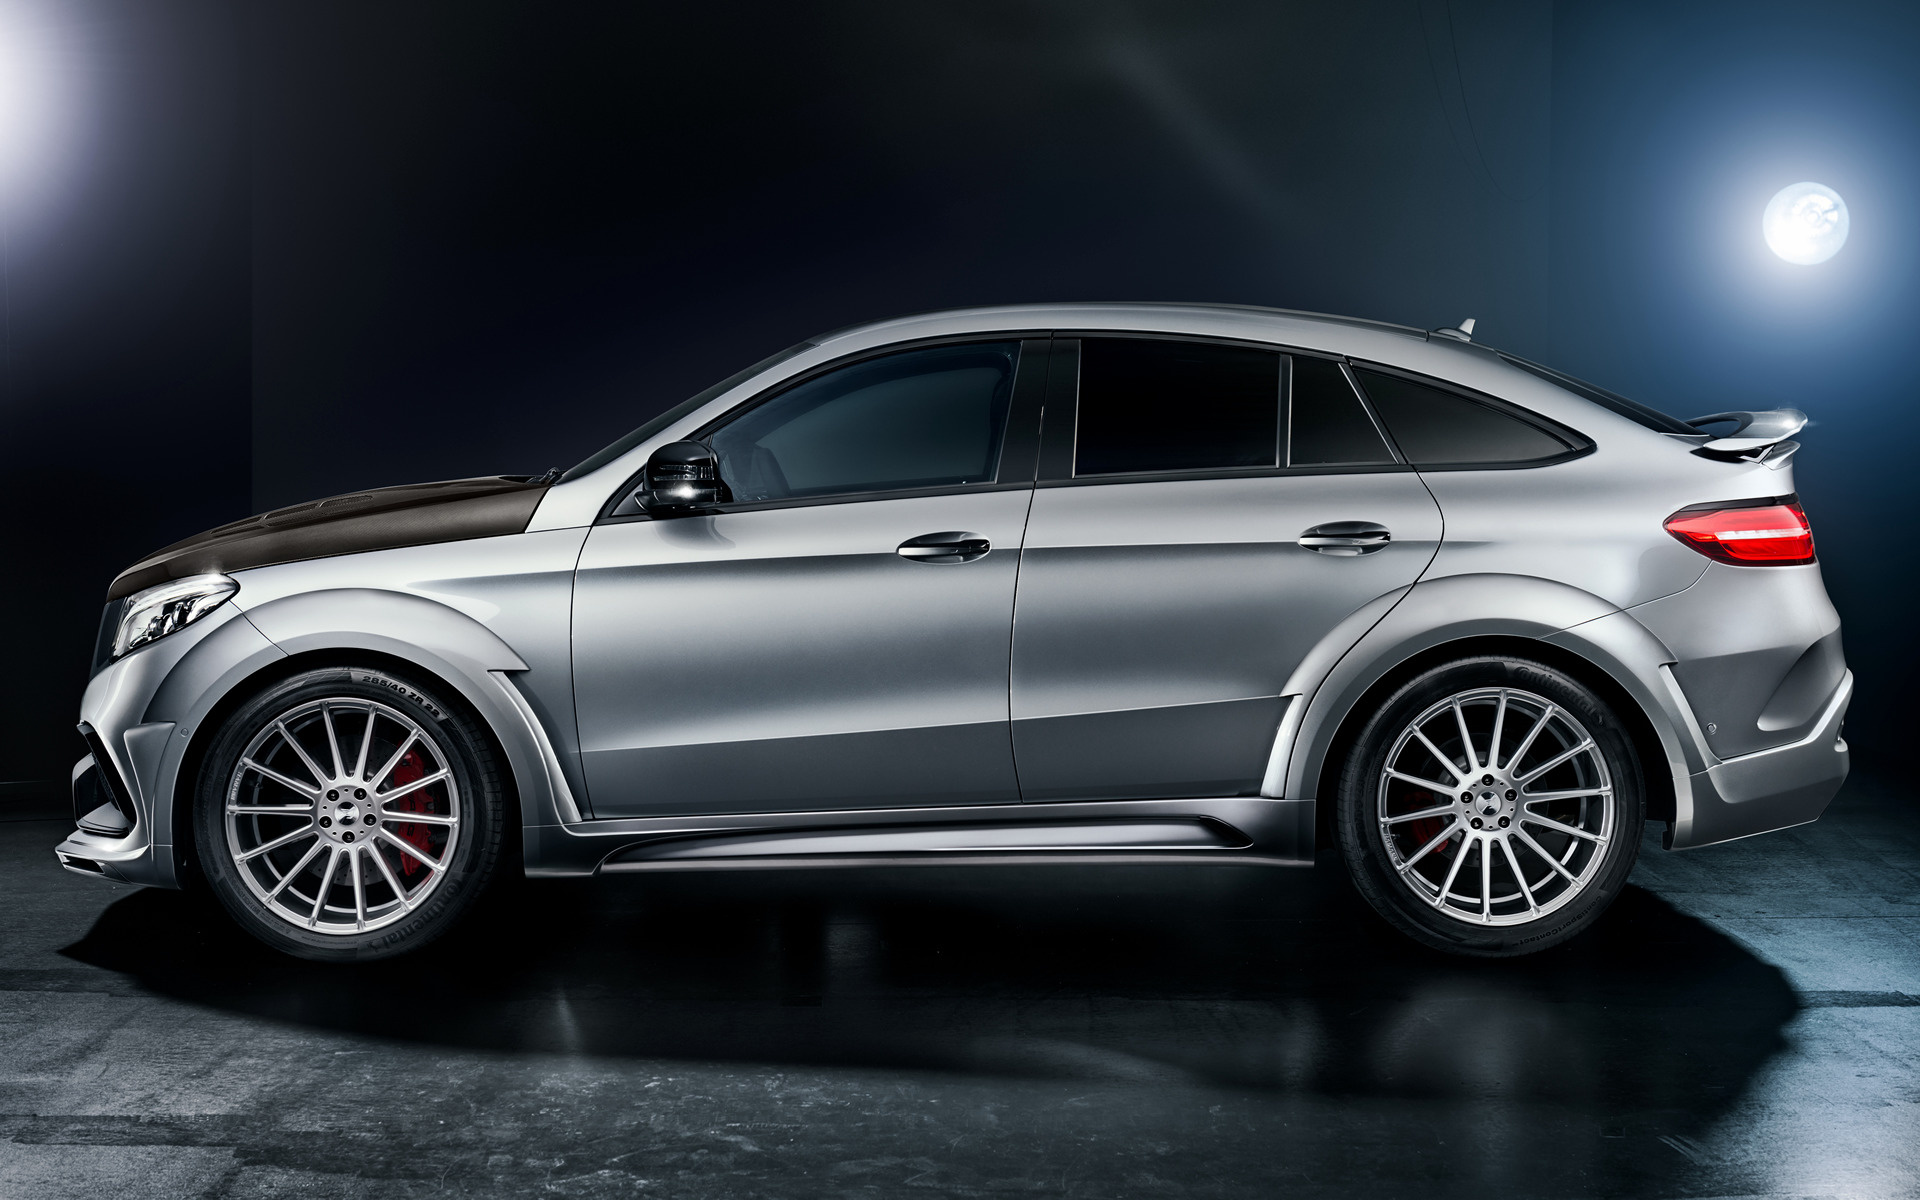 2016 Mercedes-AMG GLE 63 S Coupe by Hamann - Wallpapers and HD Images ...